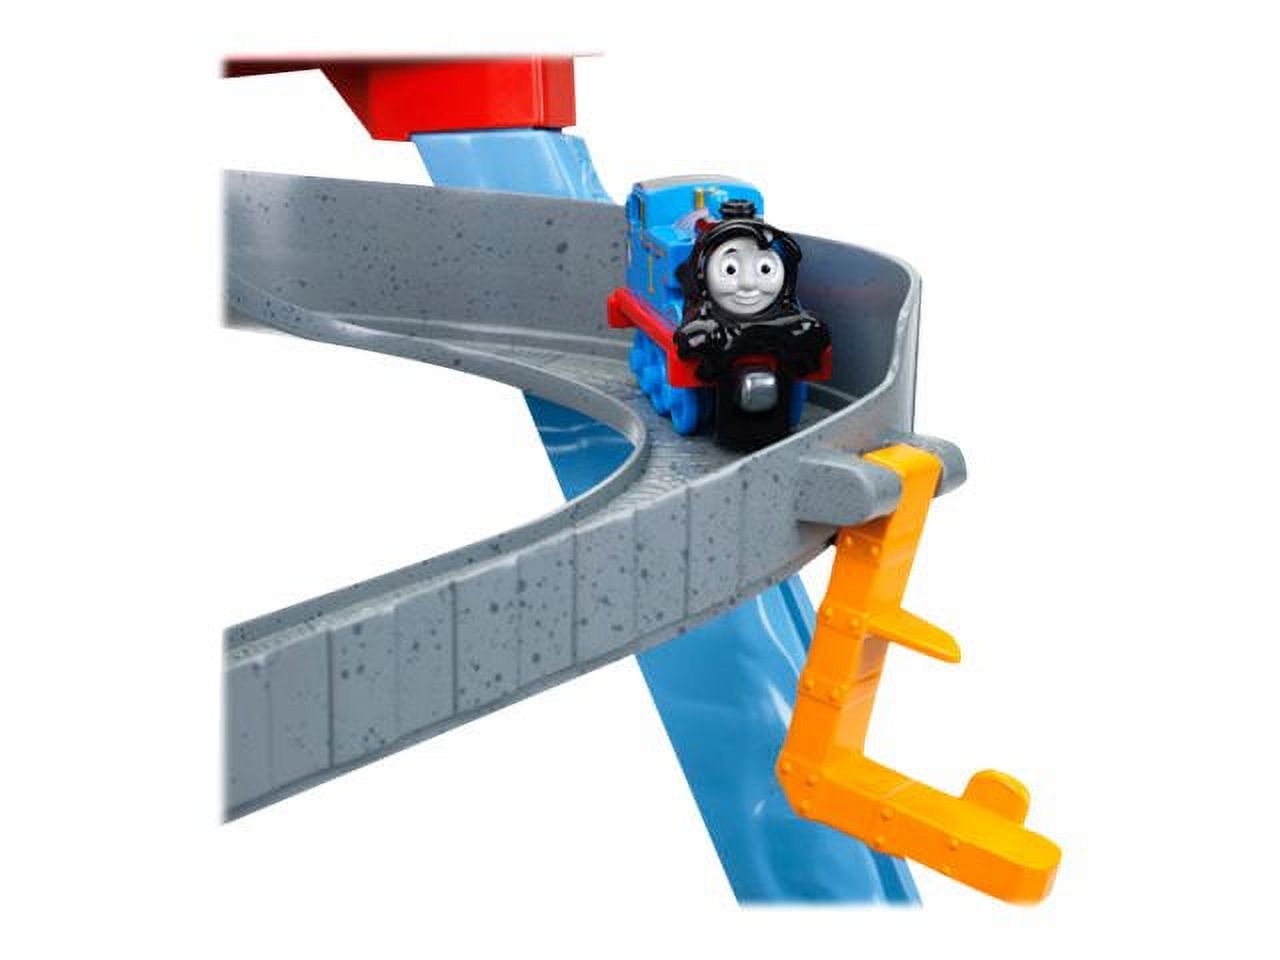 Fisher-Price Thomas & Friends Take-n-Play - Spills & Thrills on Sodor - image 3 of 8